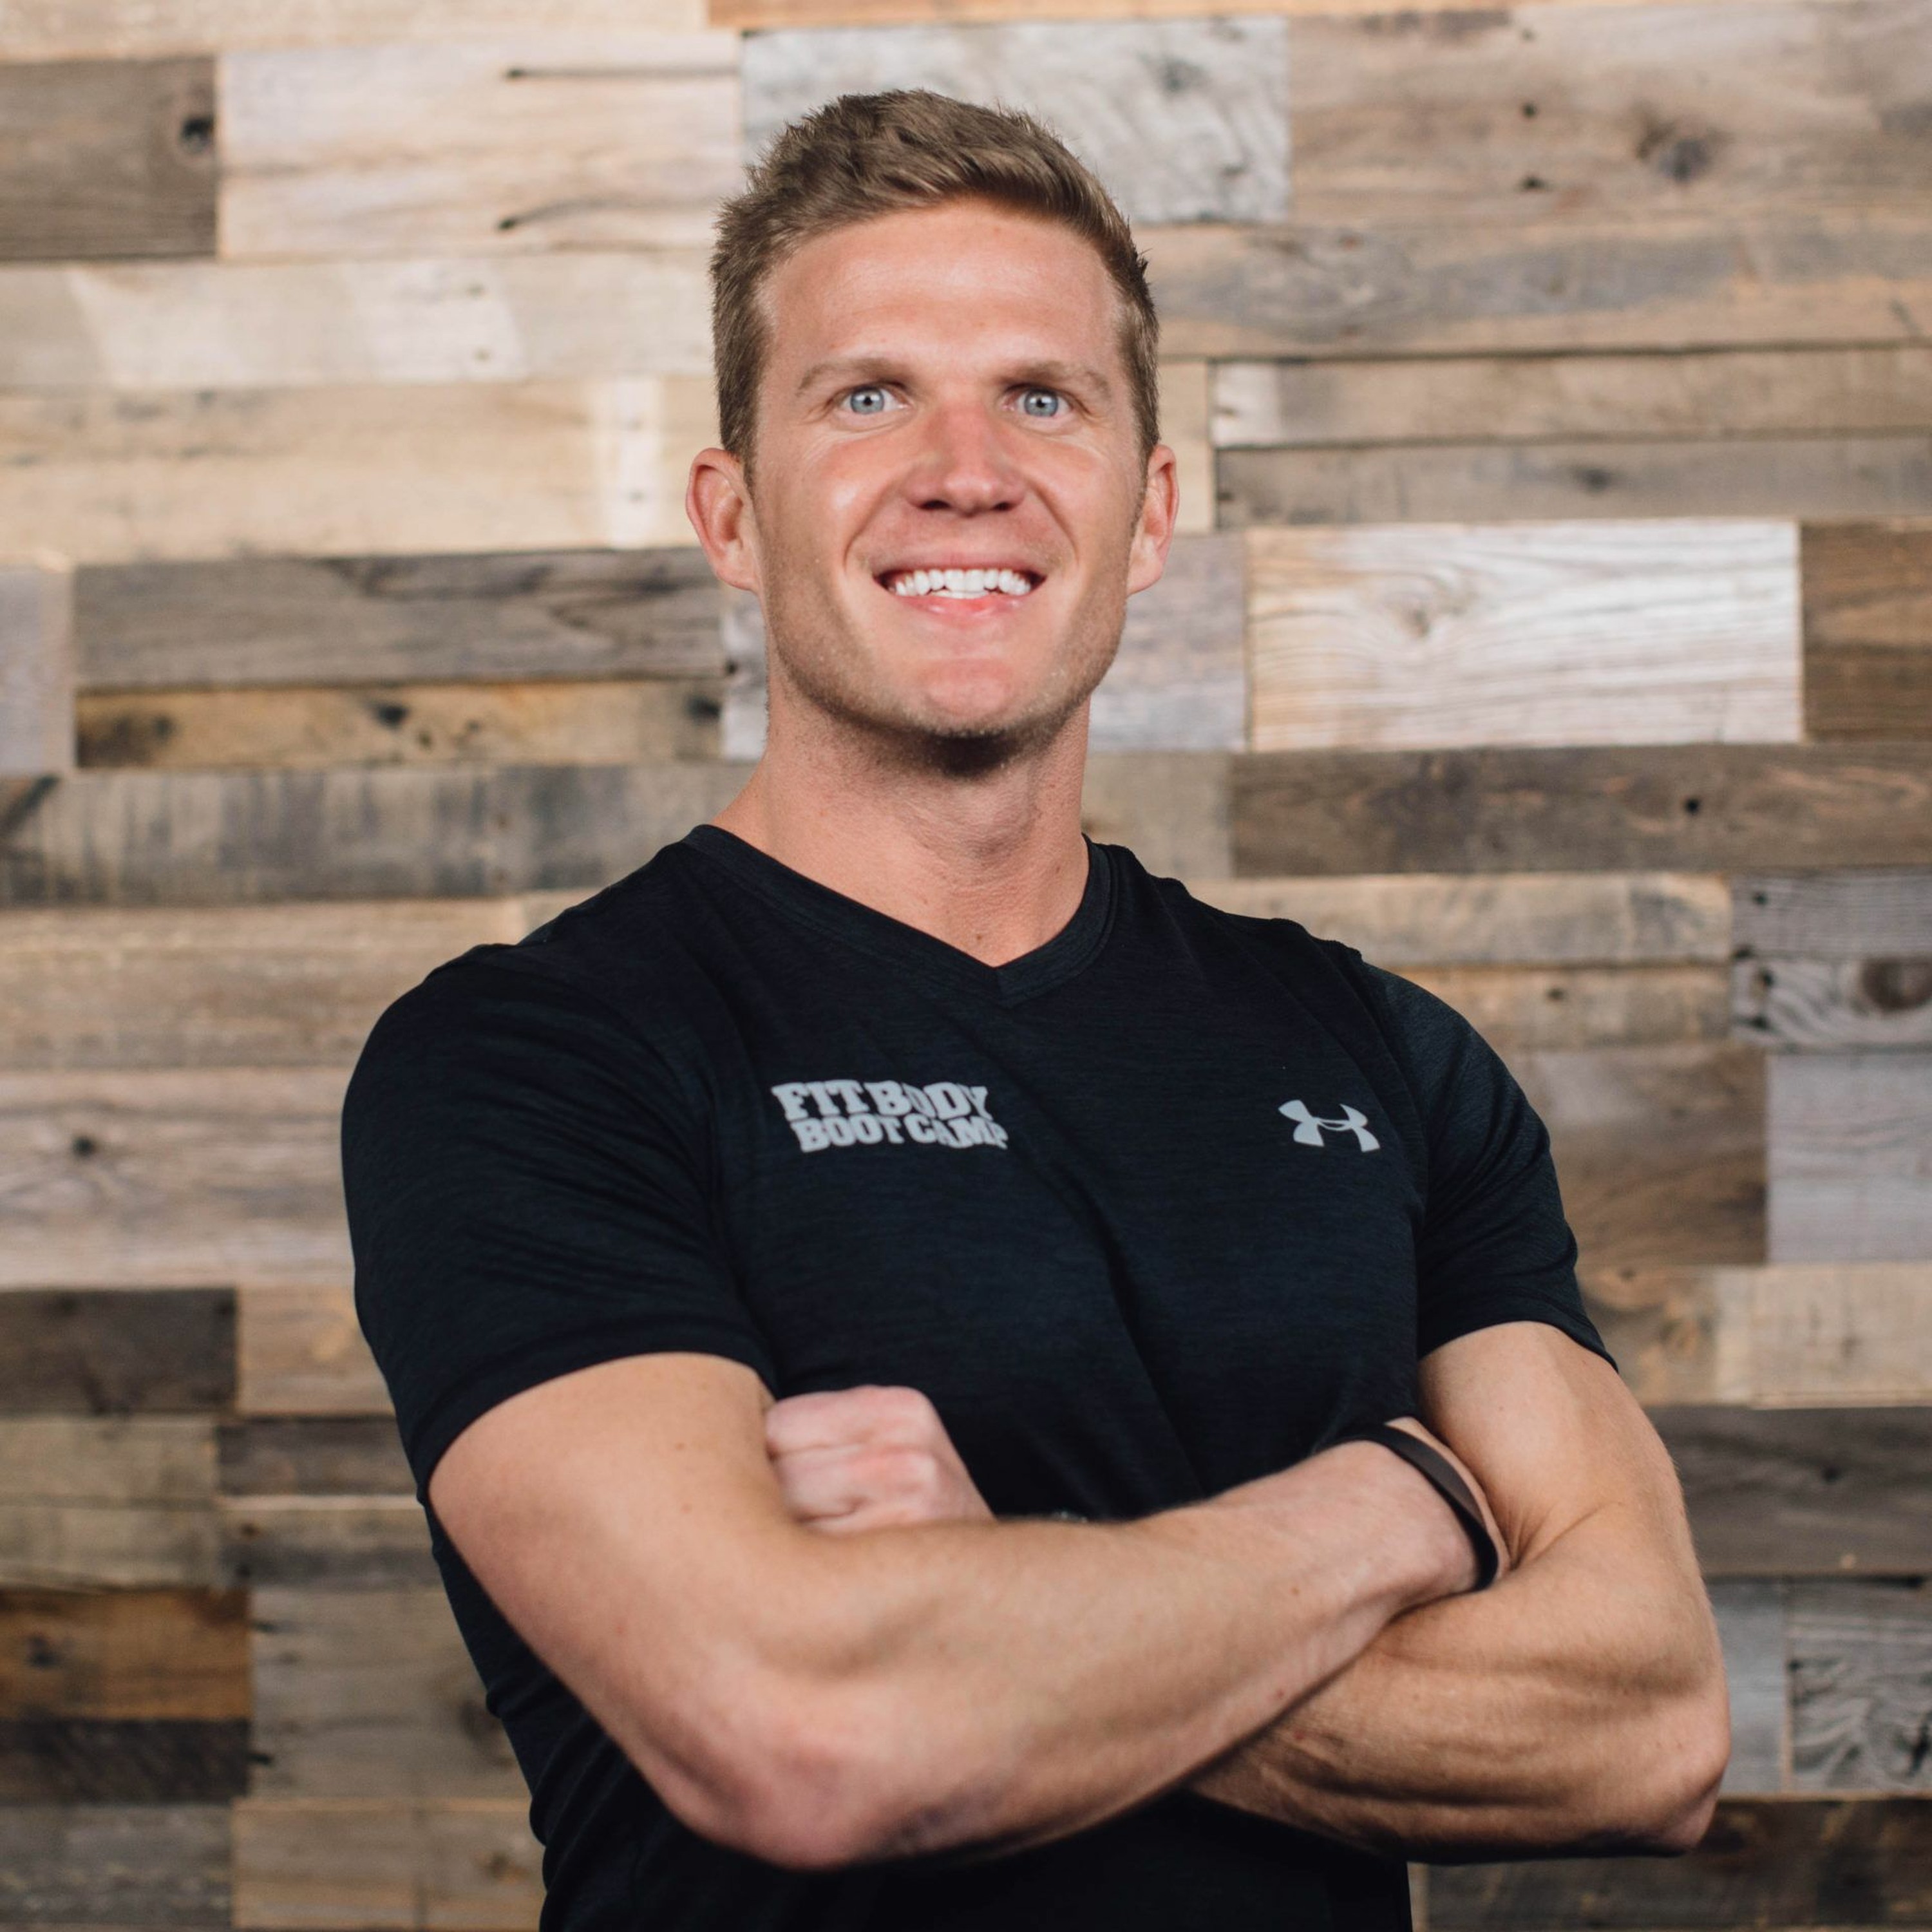 Circuit Training For Maximum Workout Efficiency With Bryce Henson